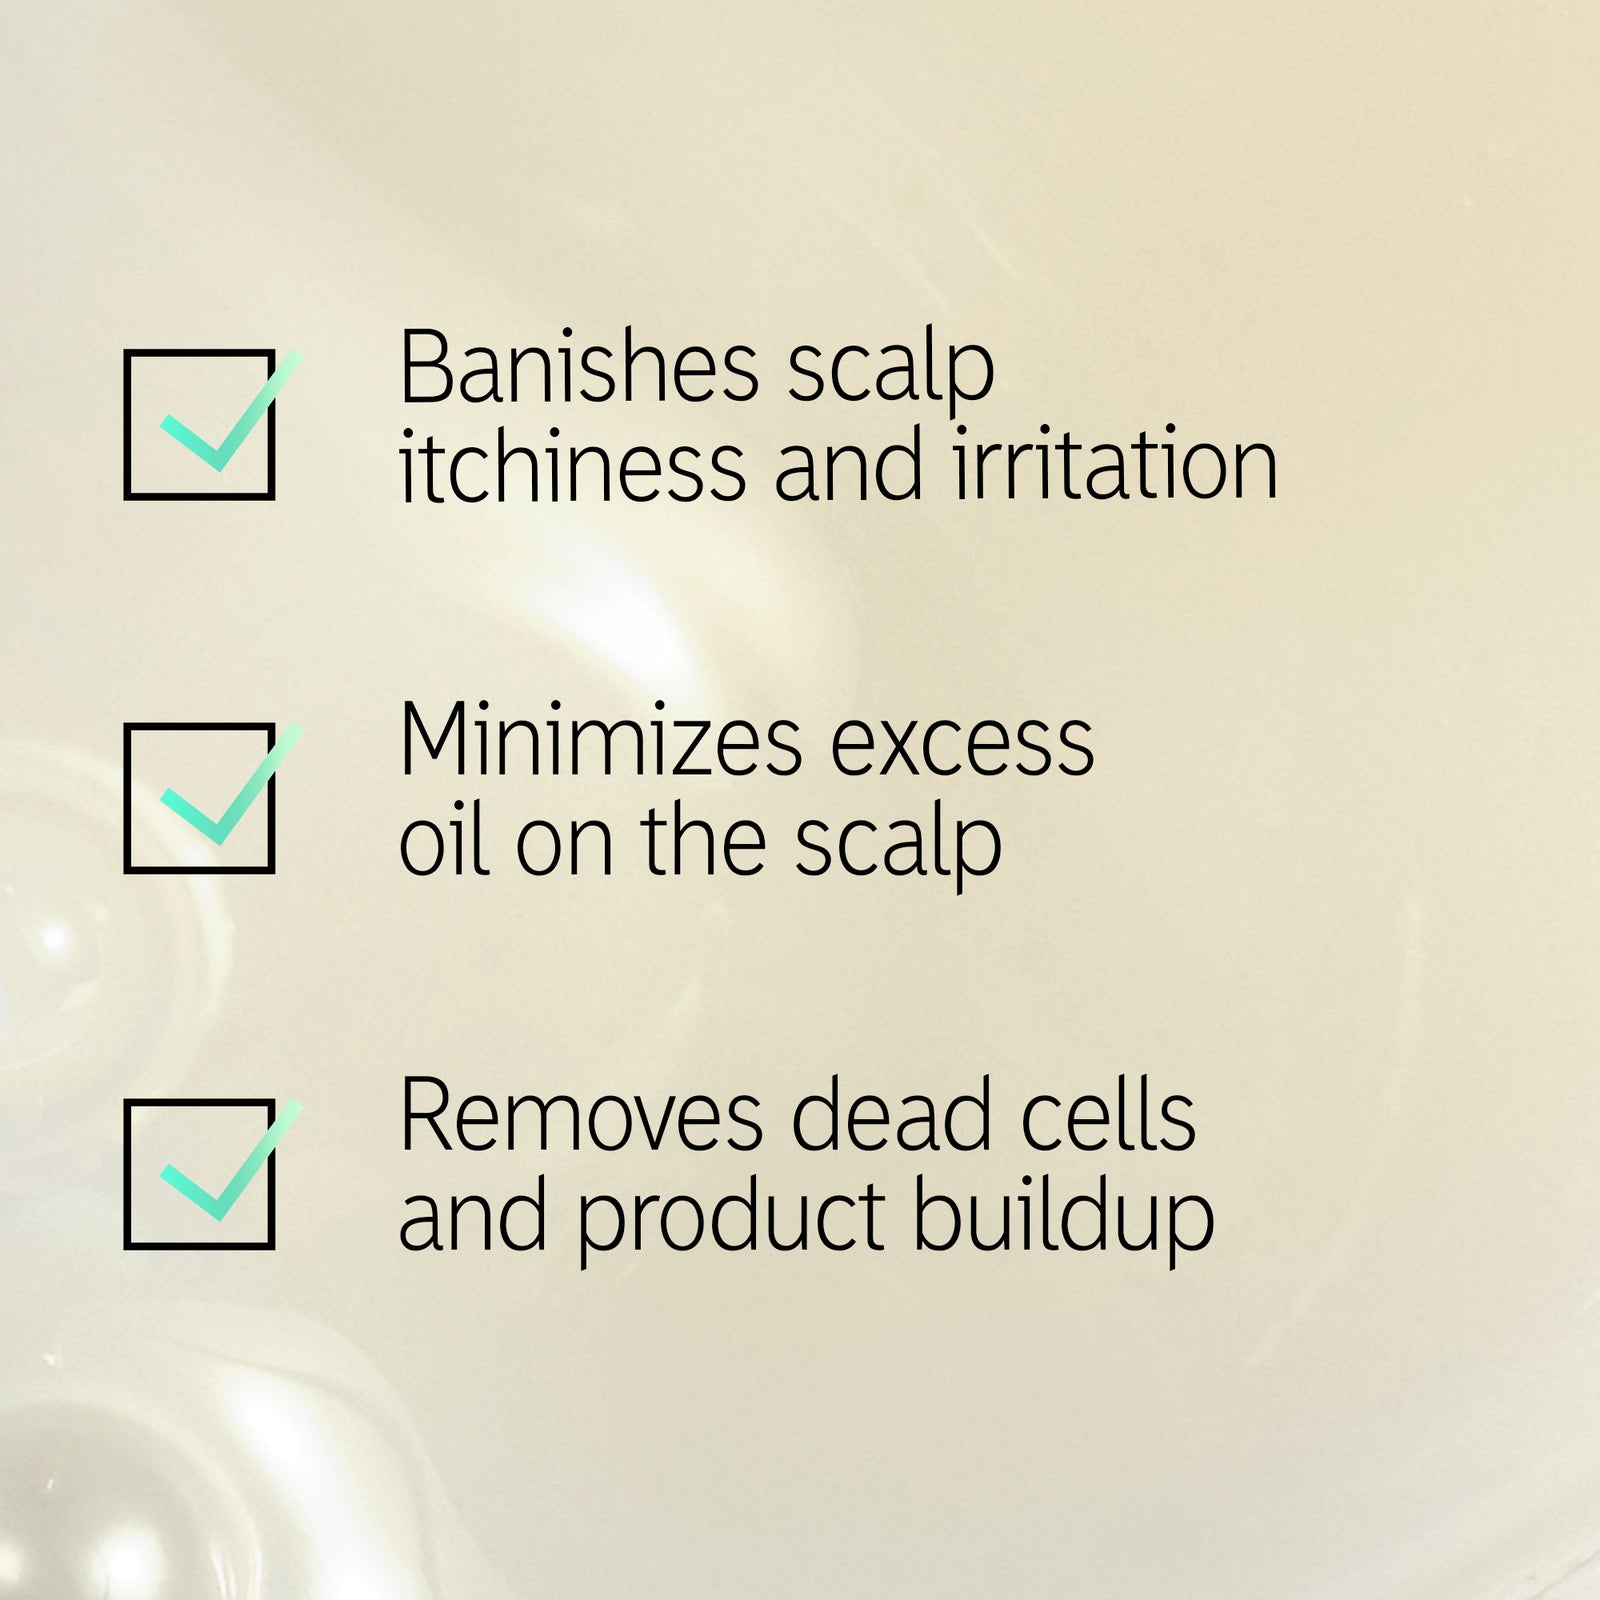 Goop with text overlay  'Banishes scalp itchiness and irritation, minimizes excess oil on the scalp and removes dead ells and product buildup'